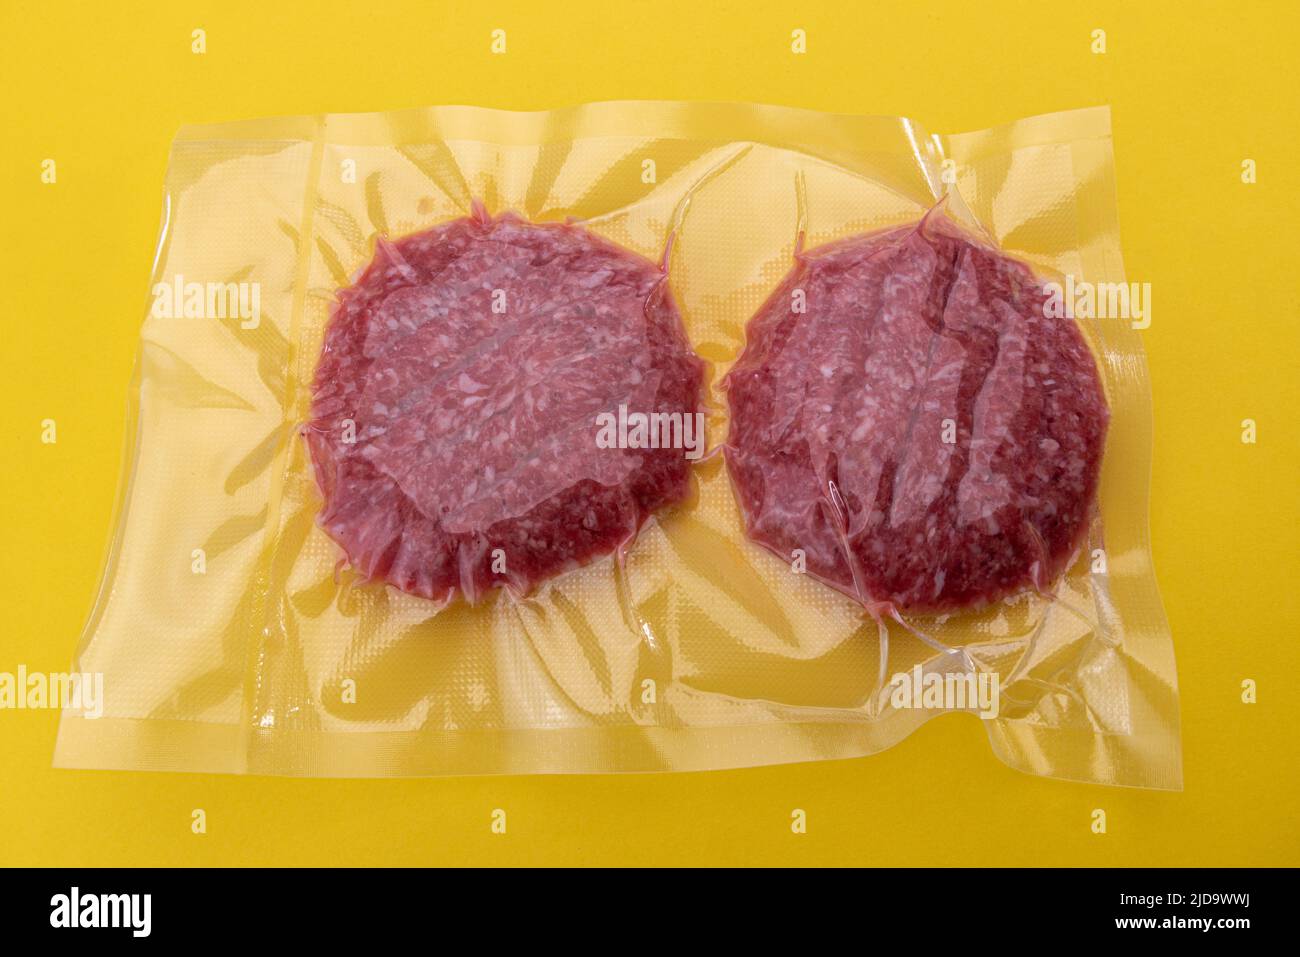 Burger meat for hamburger in vacuum packed sealed for sous vide cooking isolated on yellow background Stock Photo